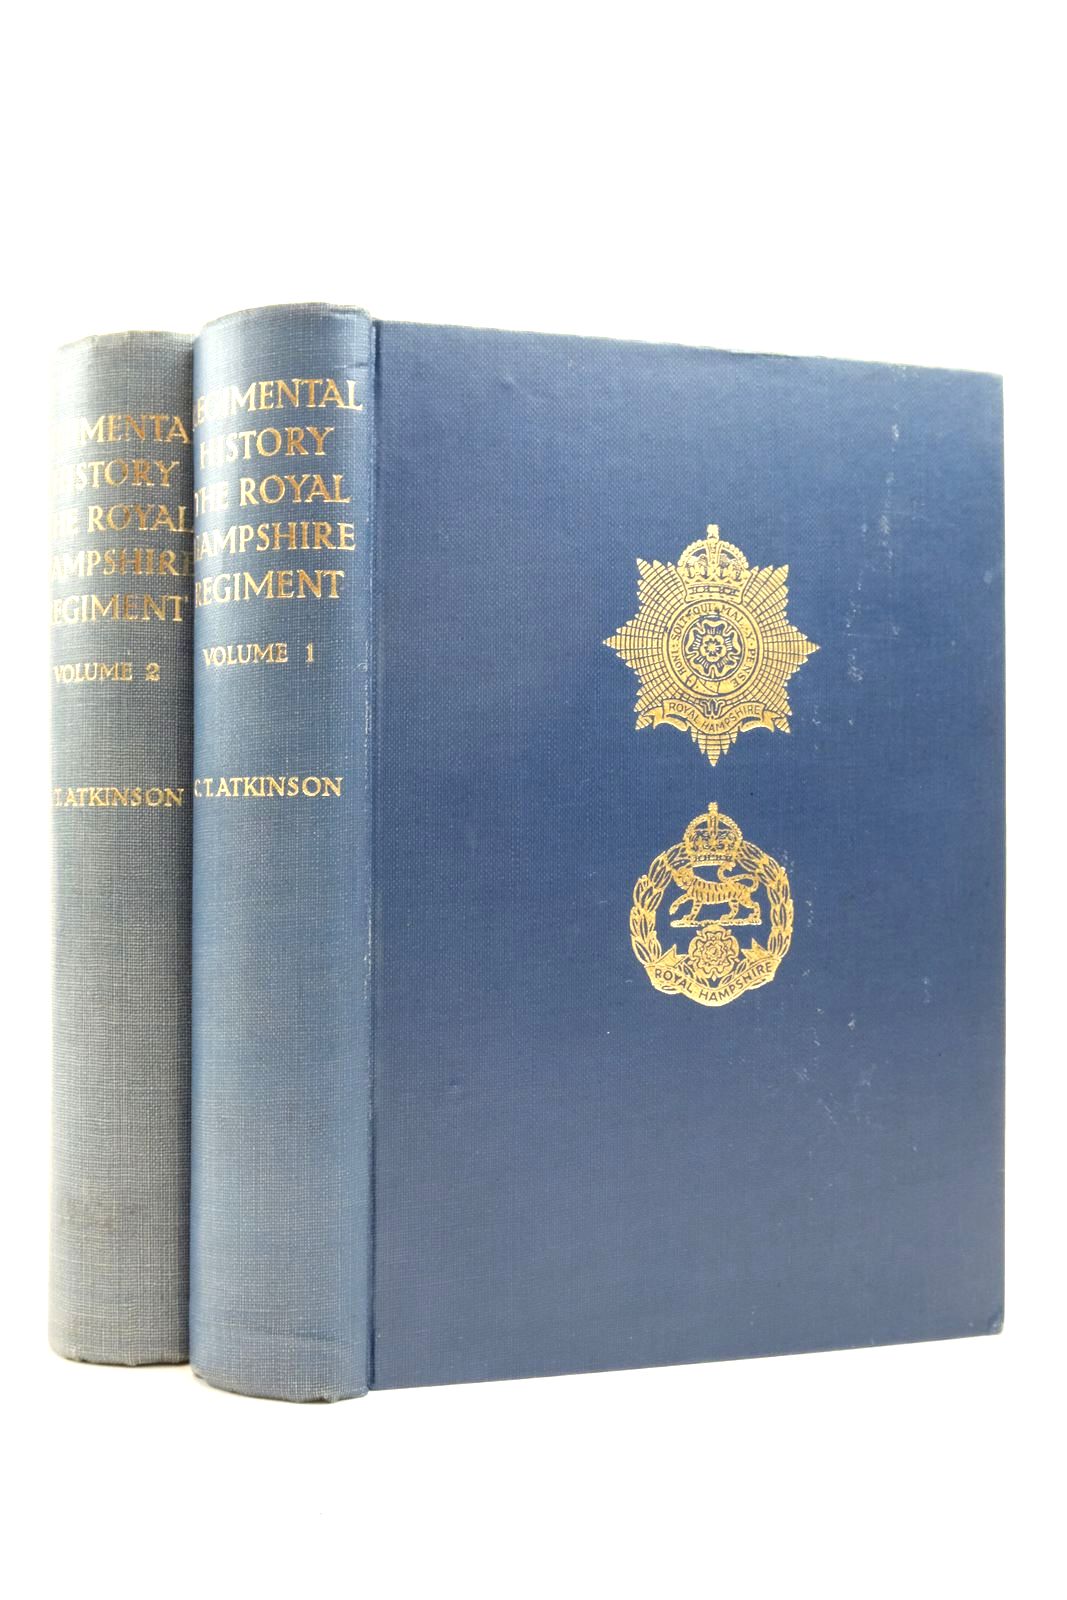 Photo of REGIMENTAL HISTORY THE ROYAL HAMPSHIRE REGIMENT (2 VOLUMES) written by Atkinson, C.T. published by Robert Maclehose And Co. Ltd (STOCK CODE: 2137719)  for sale by Stella & Rose's Books